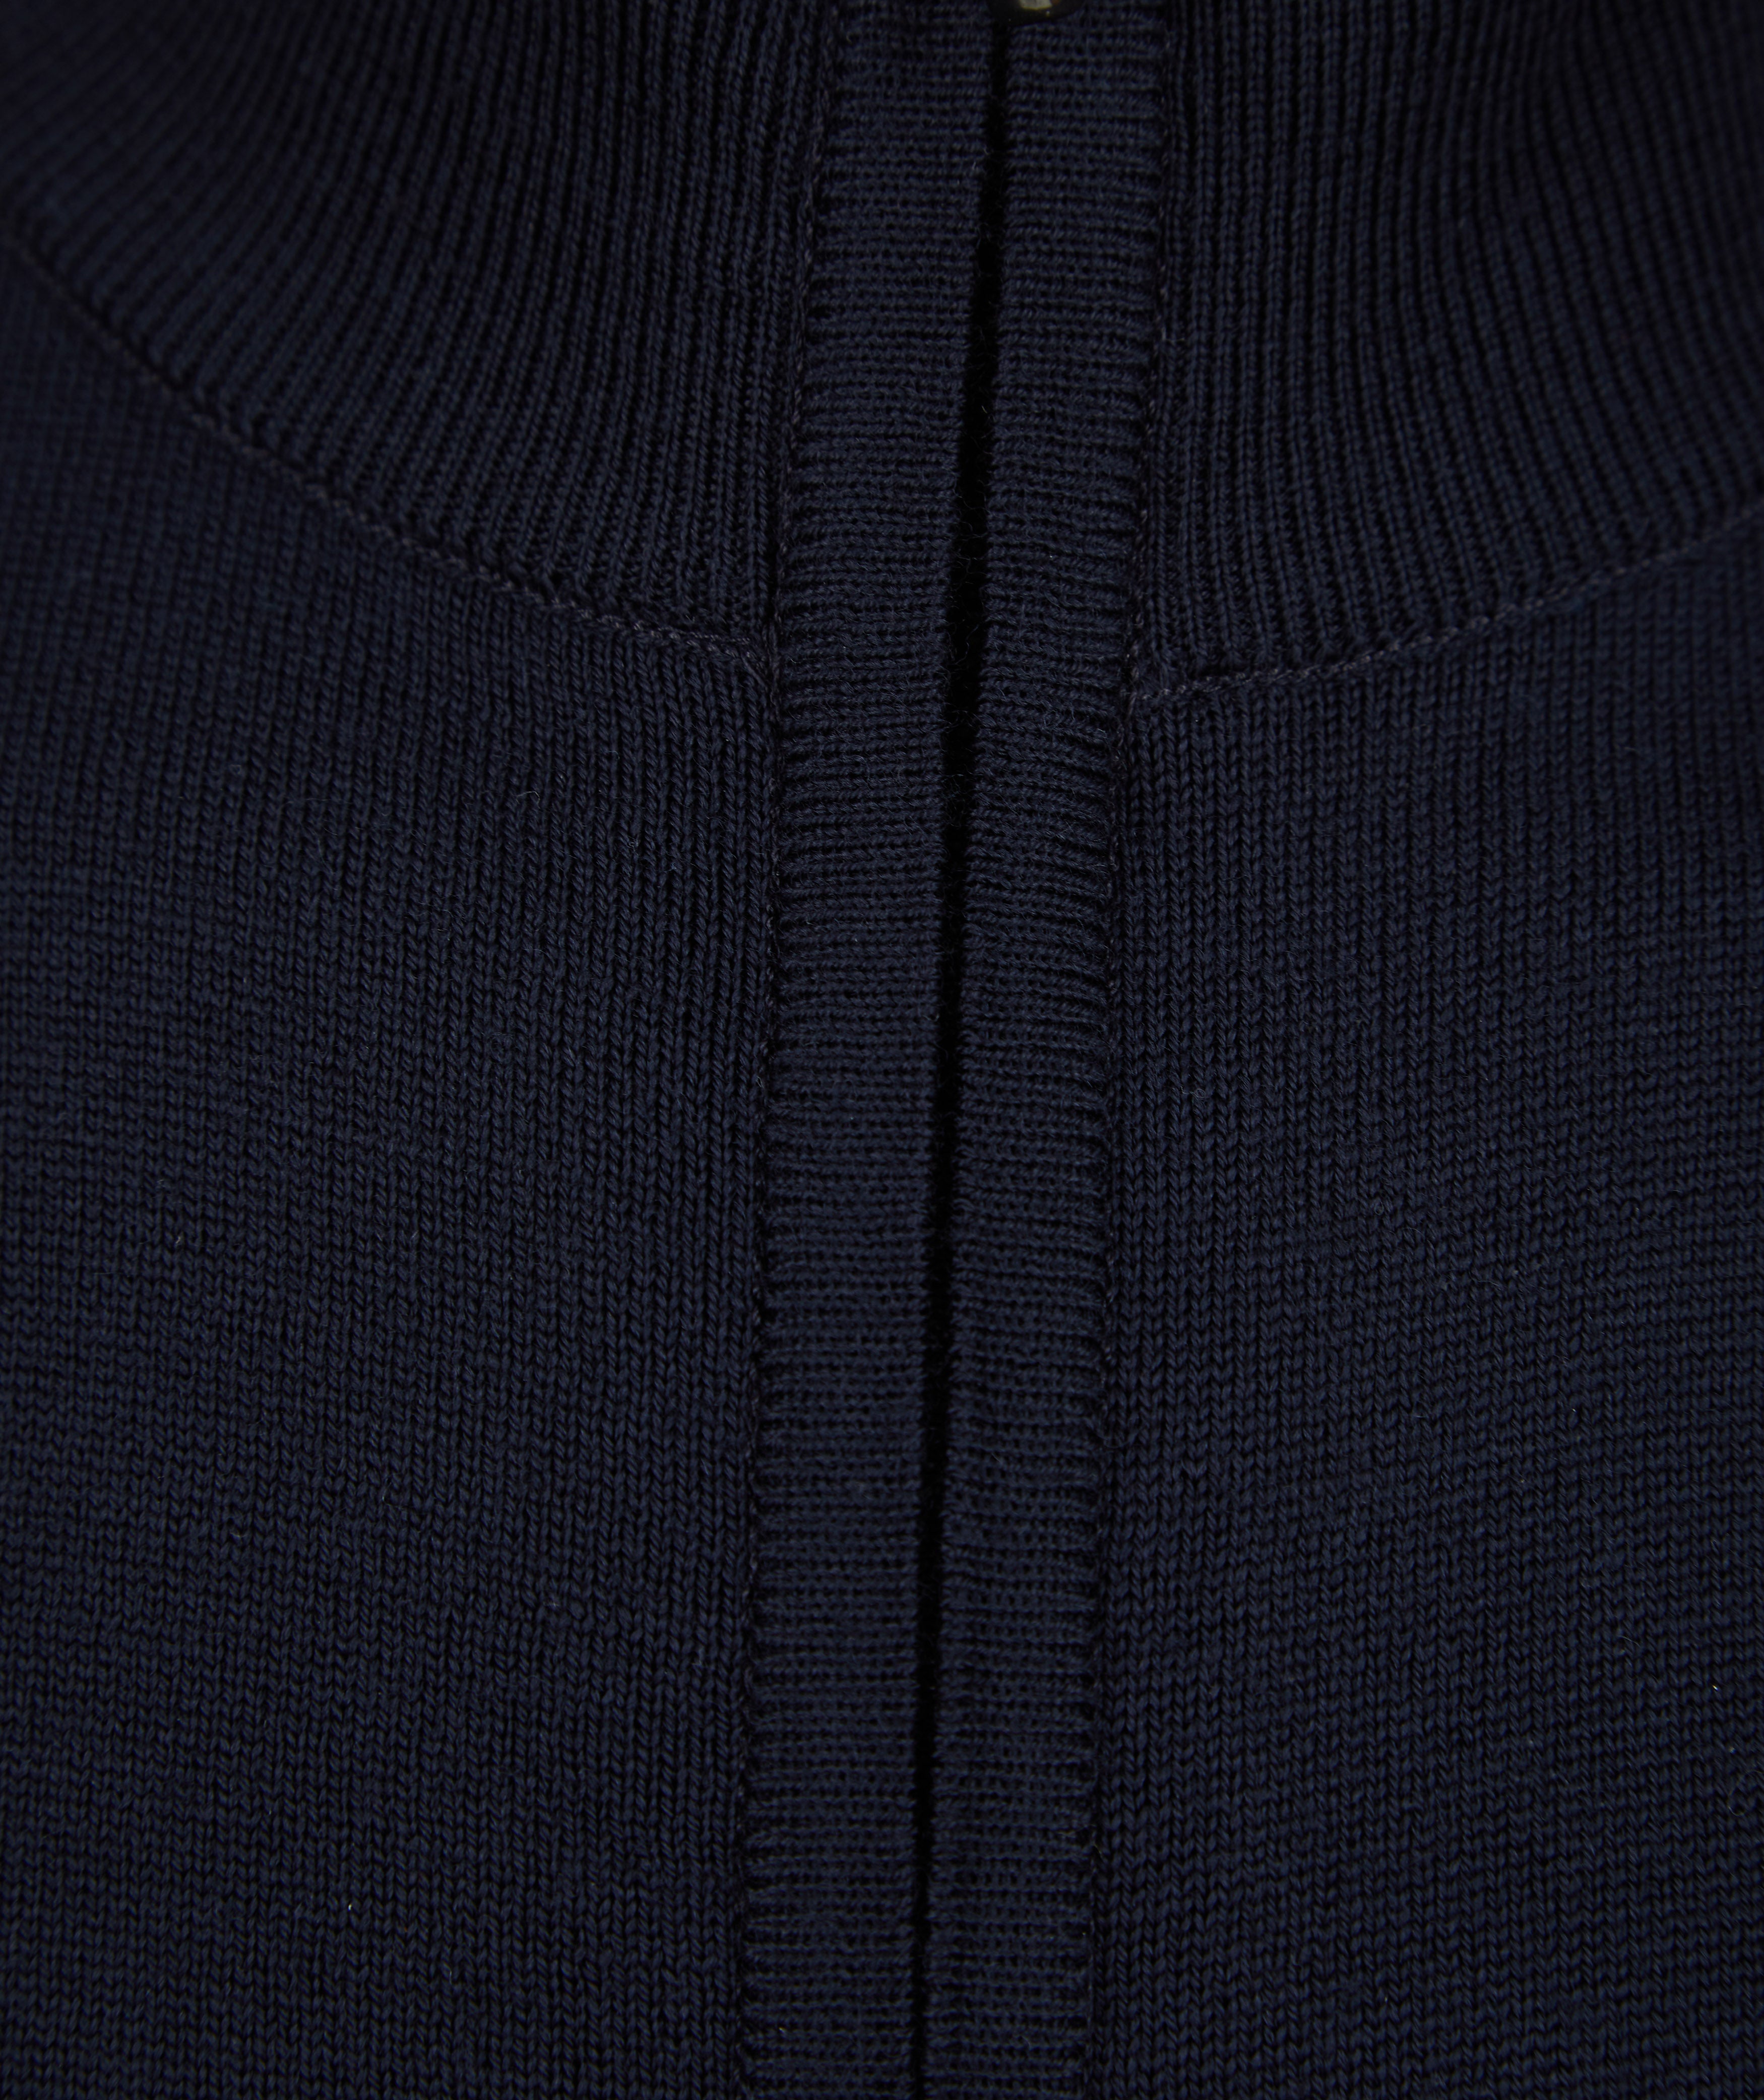 Load image into Gallery viewer, John Smedley Claygate Zip Jacket Navy
